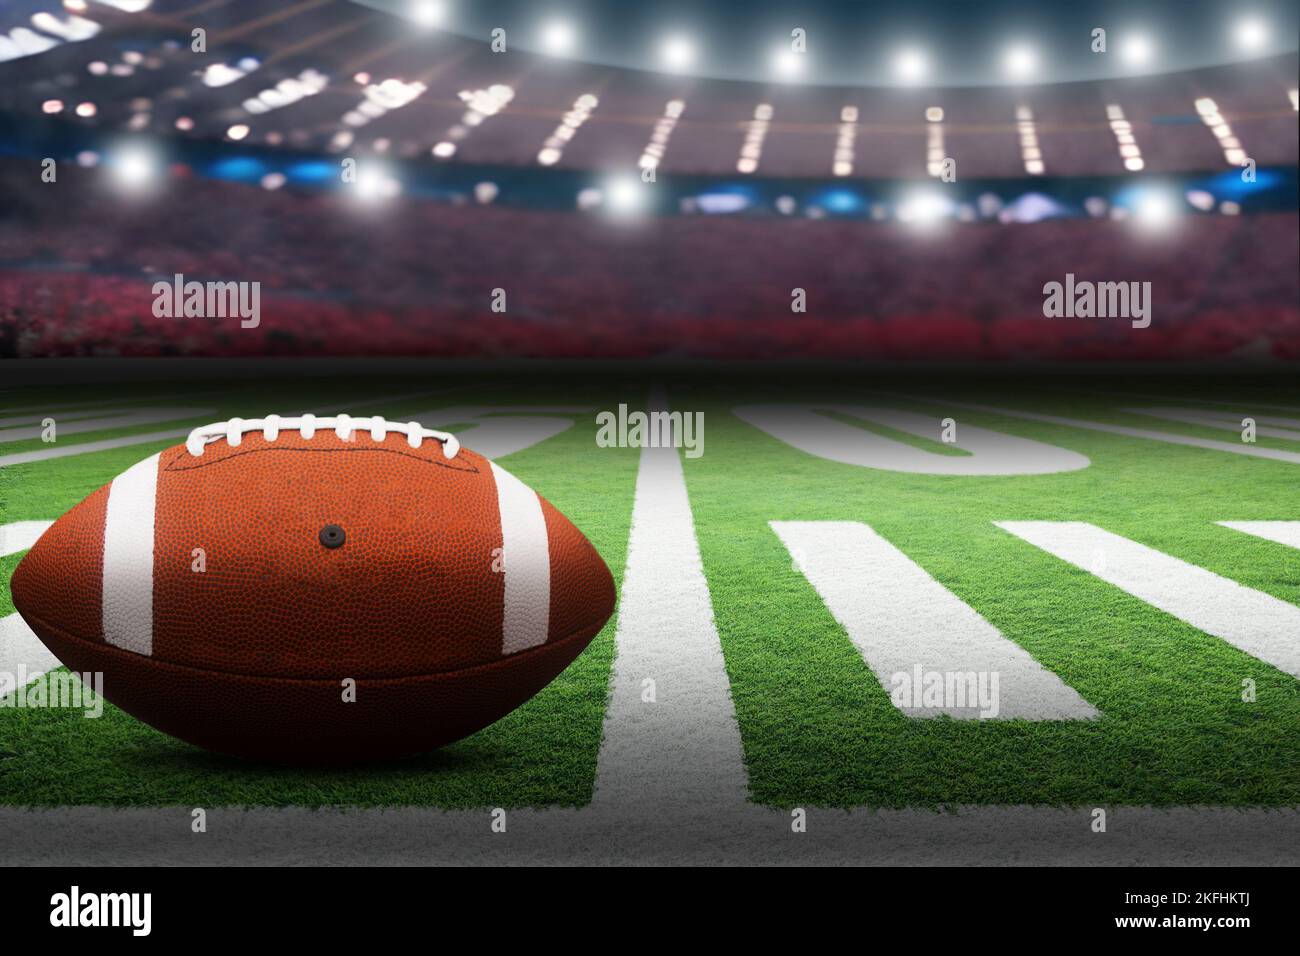 American football on field in stadium with dramatic spot lighting and copy space. Focus on foreground ball with shallow depth of field on background. Stock Photo